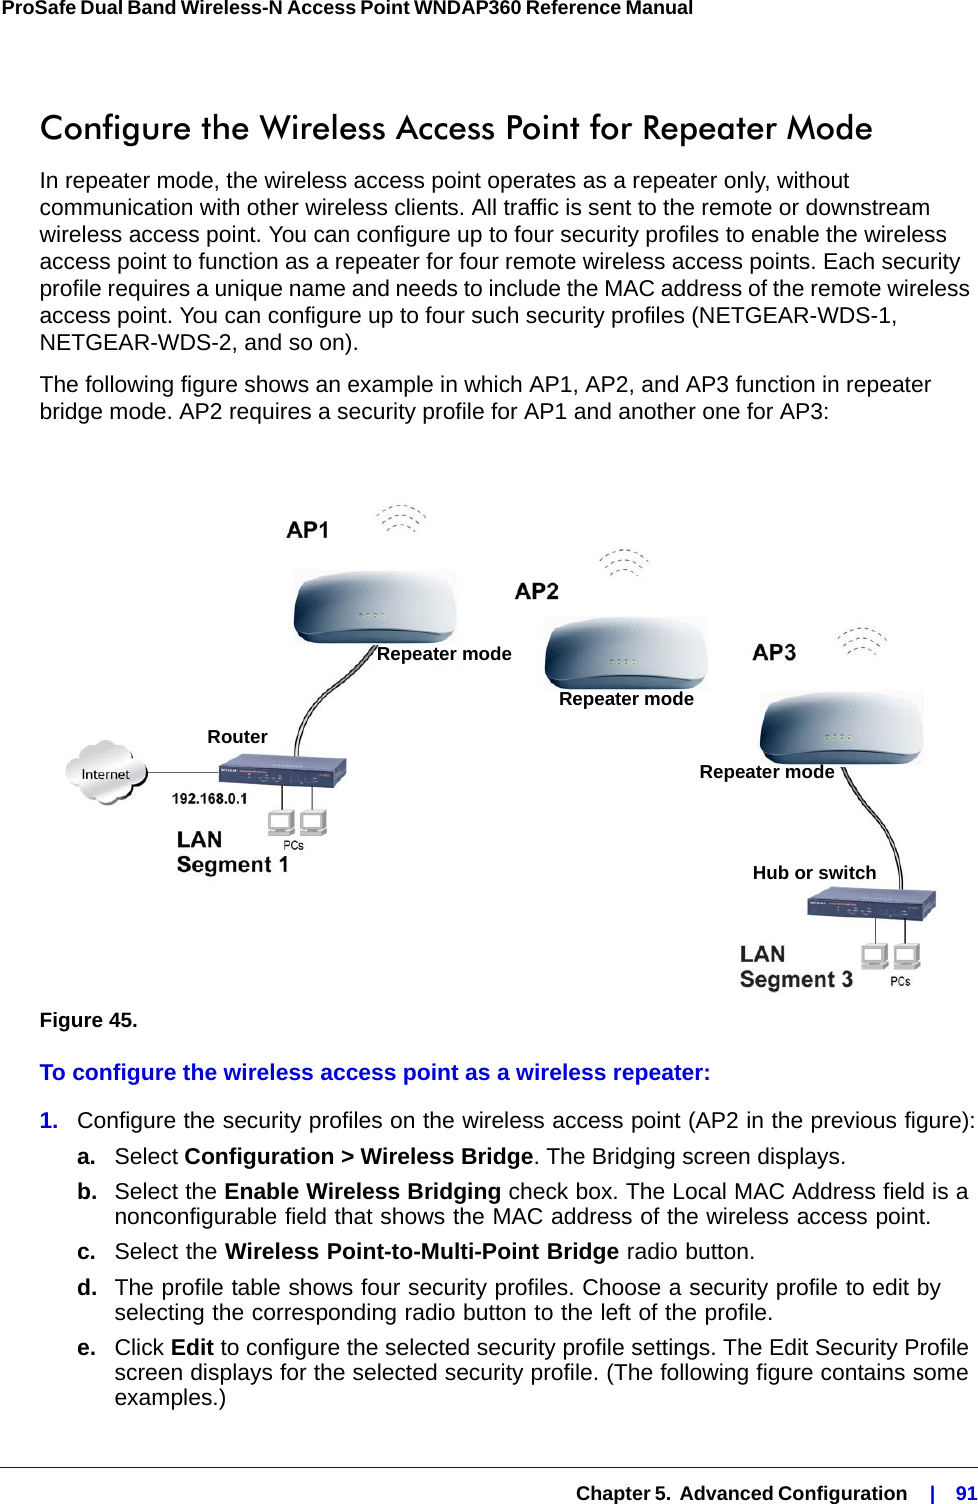   Chapter 5.  Advanced Configuration    |    91ProSafe Dual Band Wireless-N Access Point WNDAP360 Reference Manual Configure the Wireless Access Point for Repeater ModeIn repeater mode, the wireless access point operates as a repeater only, without communication with other wireless clients. All traffic is sent to the remote or downstream wireless access point. You can configure up to four security profiles to enable the wireless access point to function as a repeater for four remote wireless access points. Each security profile requires a unique name and needs to include the MAC address of the remote wireless access point. You can configure up to four such security profiles (NETGEAR-WDS-1, NETGEAR-WDS-2, and so on).The following figure shows an example in which AP1, AP2, and AP3 function in repeater bridge mode. AP2 requires a security profile for AP1 and another one for AP3:Figure 45. To configure the wireless access point as a wireless repeater:1.  Configure the security profiles on the wireless access point (AP2 in the previous figure):a. Select Configuration &gt; Wireless Bridge. The Bridging screen displays.b.  Select the Enable Wireless Bridging check box. The Local MAC Address field is a nonconfigurable field that shows the MAC address of the wireless access point.c.  Select the Wireless Point-to-Multi-Point Bridge radio button.d.  The profile table shows four security profiles. Choose a security profile to edit by selecting the corresponding radio button to the left of the profile.e.  Click Edit to configure the selected security profile settings. The Edit Security Profile screen displays for the selected security profile. (The following figure contains some examples.)Repeater modeRepeater modeRepeater modeRouterHub or switch